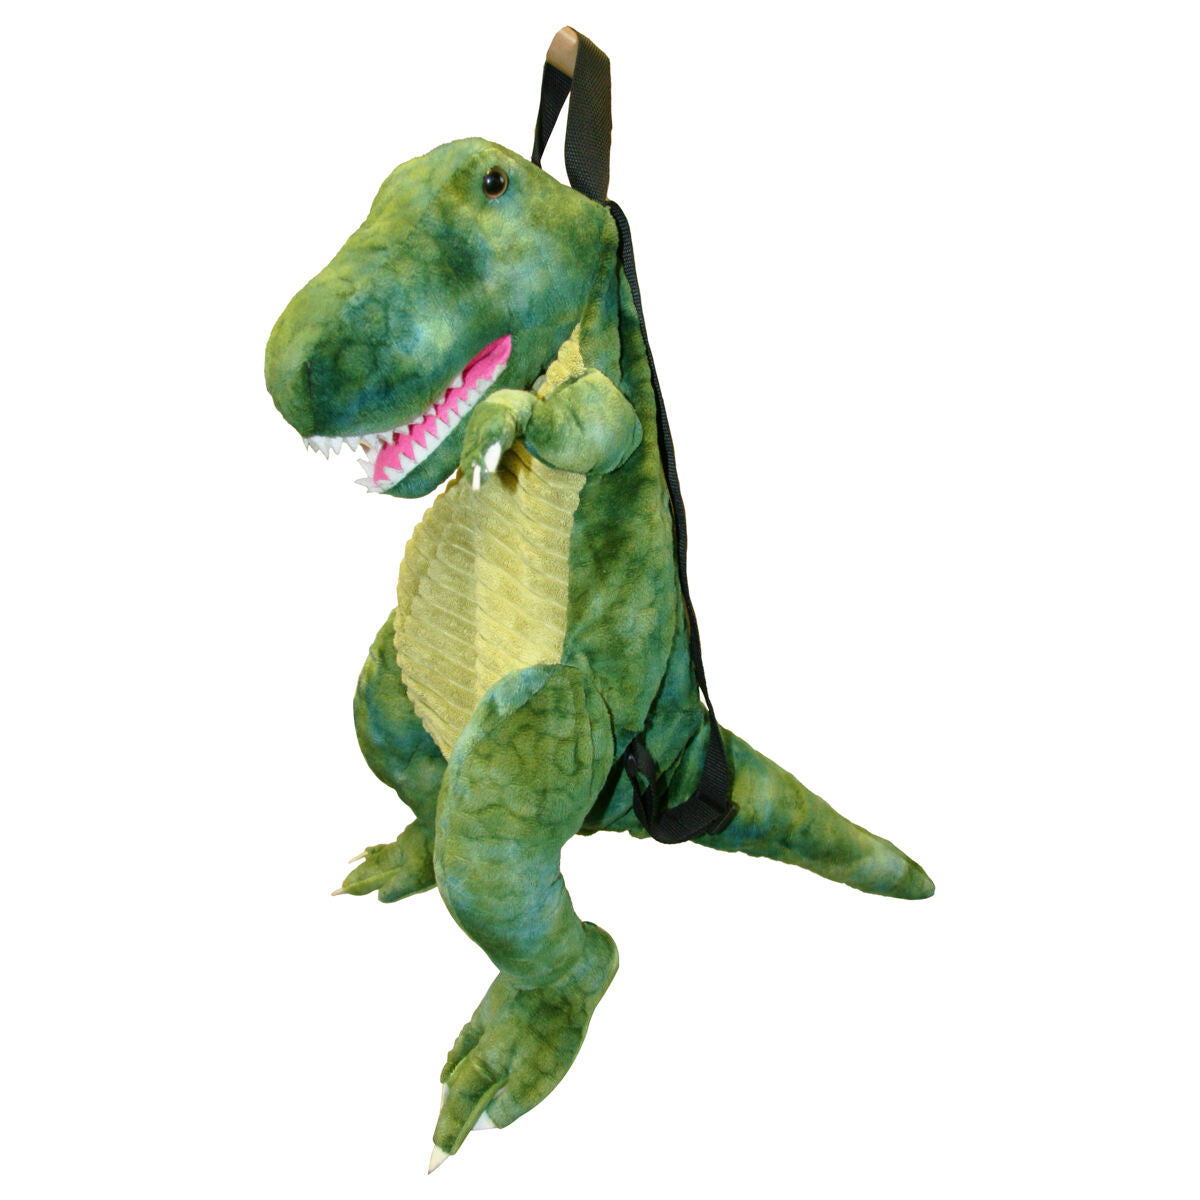 View the best prices for: t-rex dinosaur backpack green